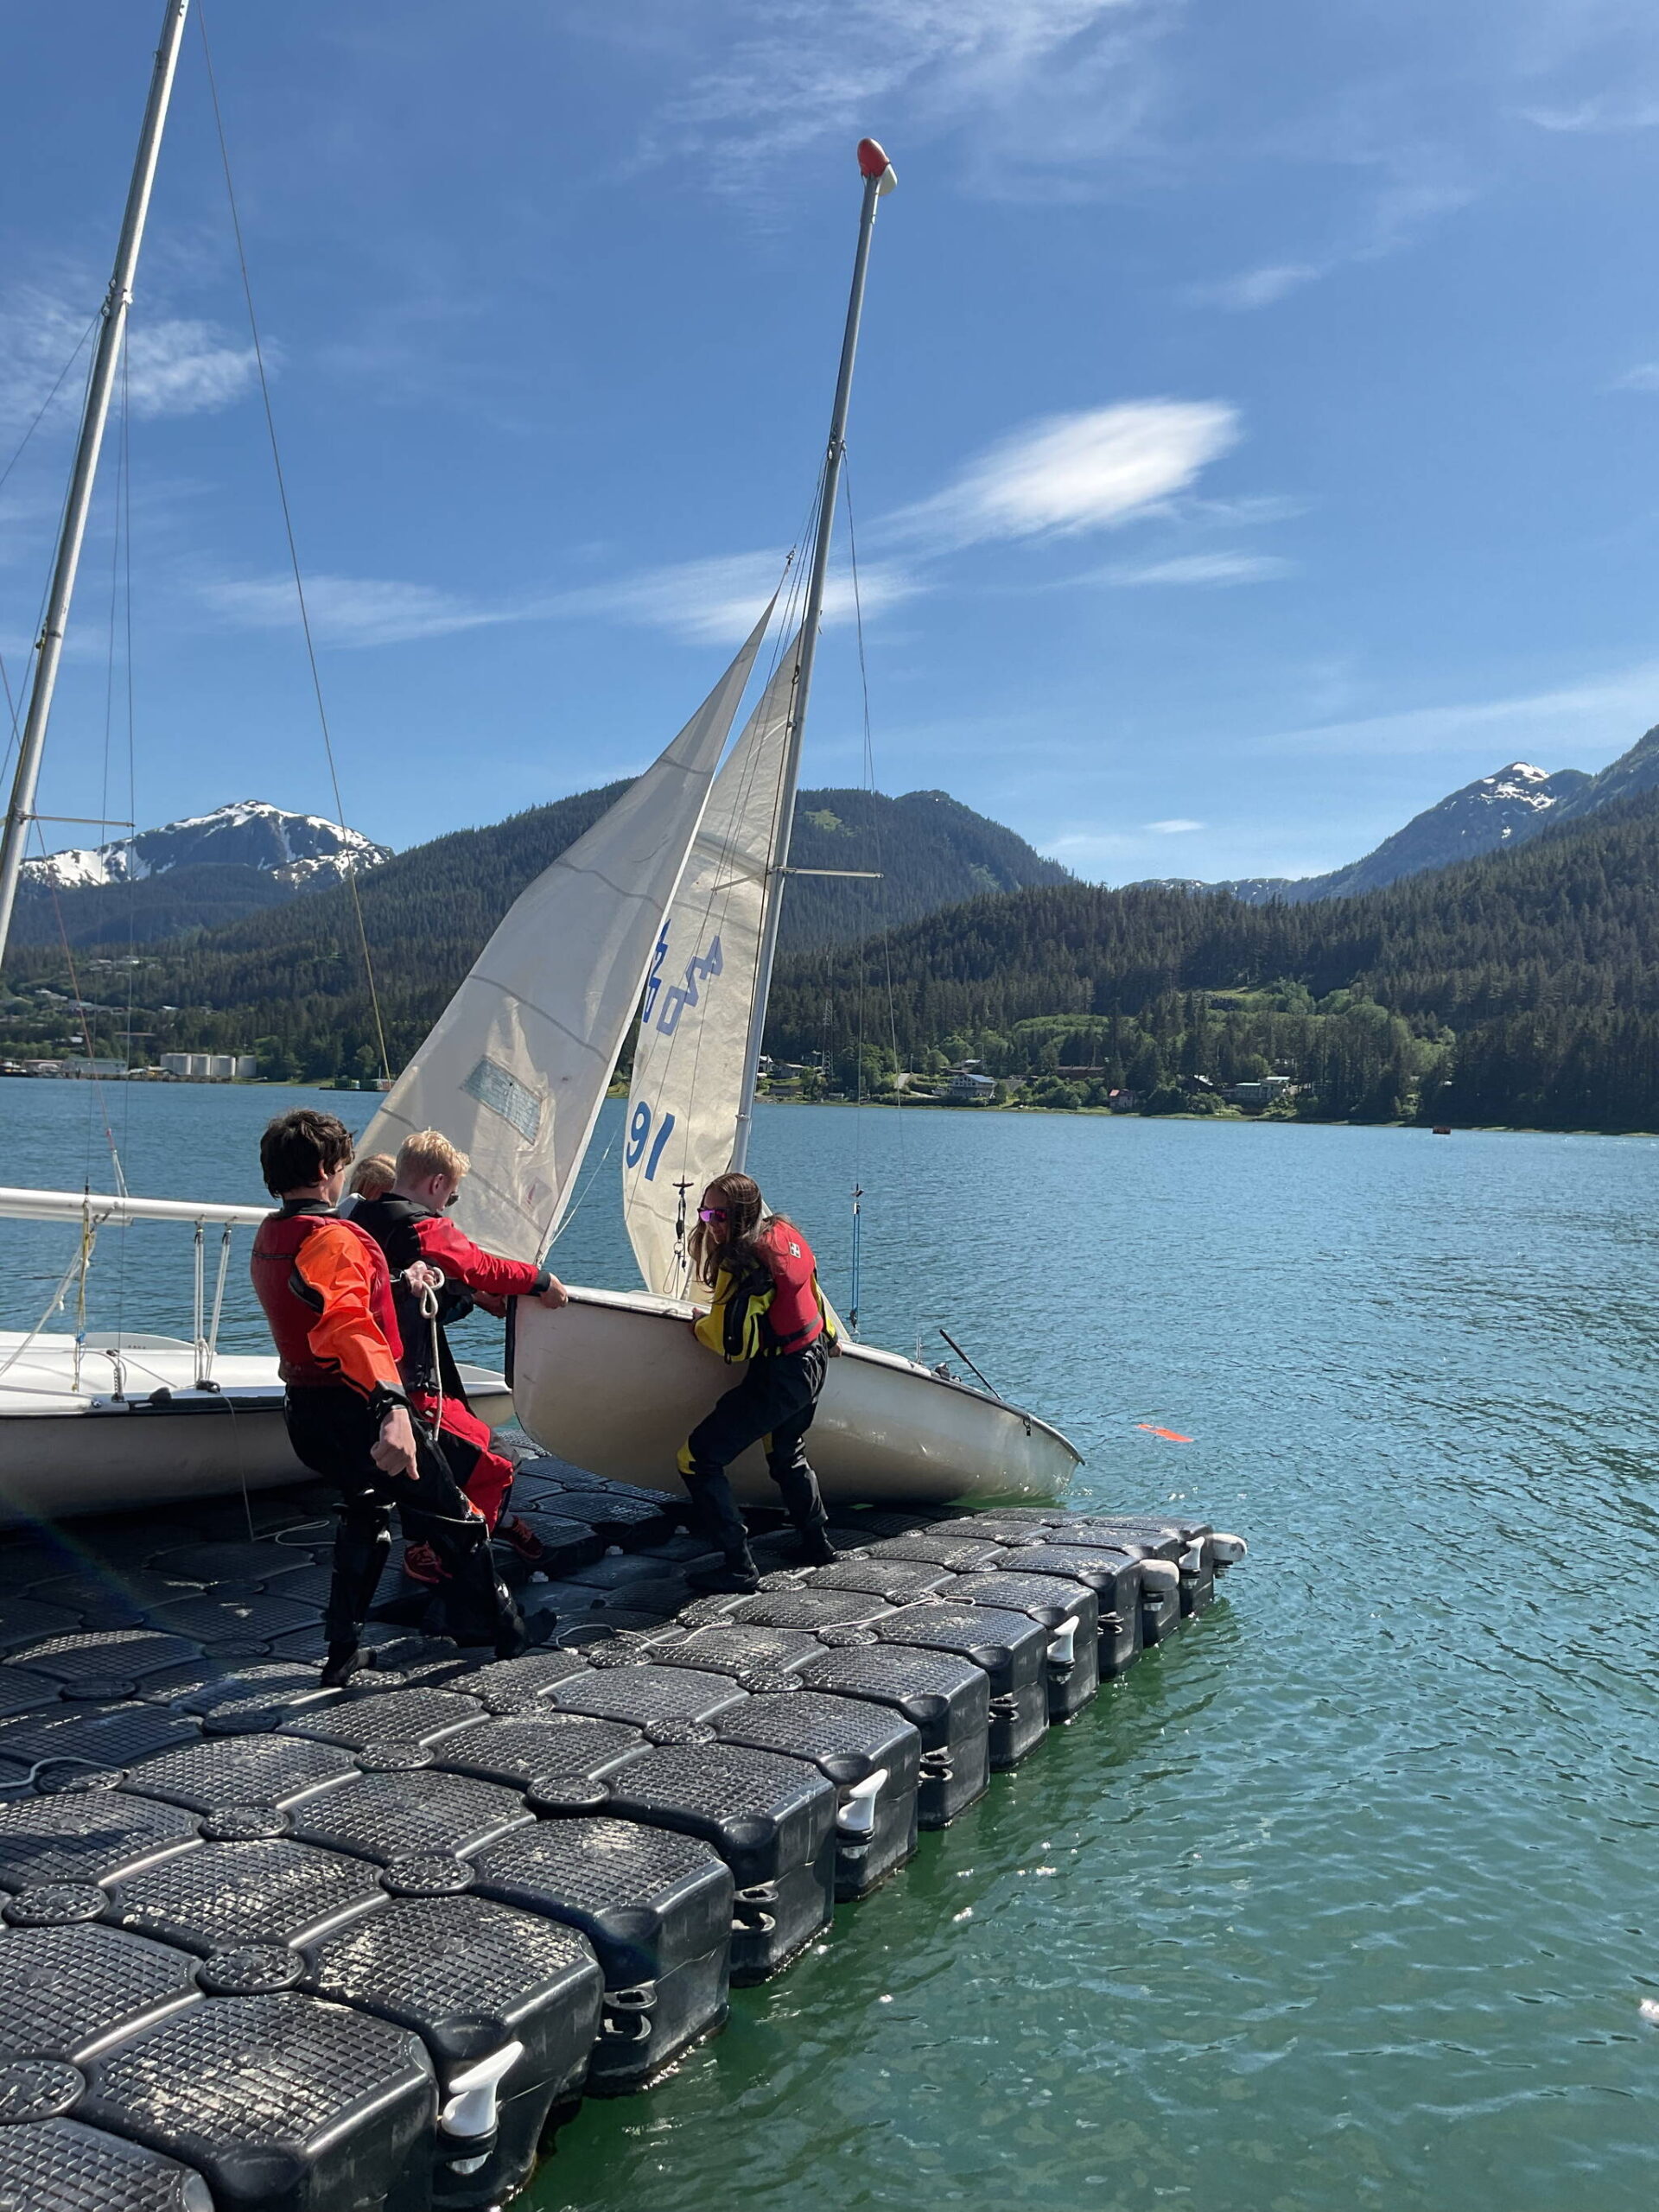 From left to right, Kaia Mangaccat, 13, Lua Mangaccat, 15, Sigrid Eller, 13, and Adrian Whitney, 19, pull a boat out of the water after a sailing lesson in Gastineau Channel this week. (Therese Pokorney / Juneau Empire)